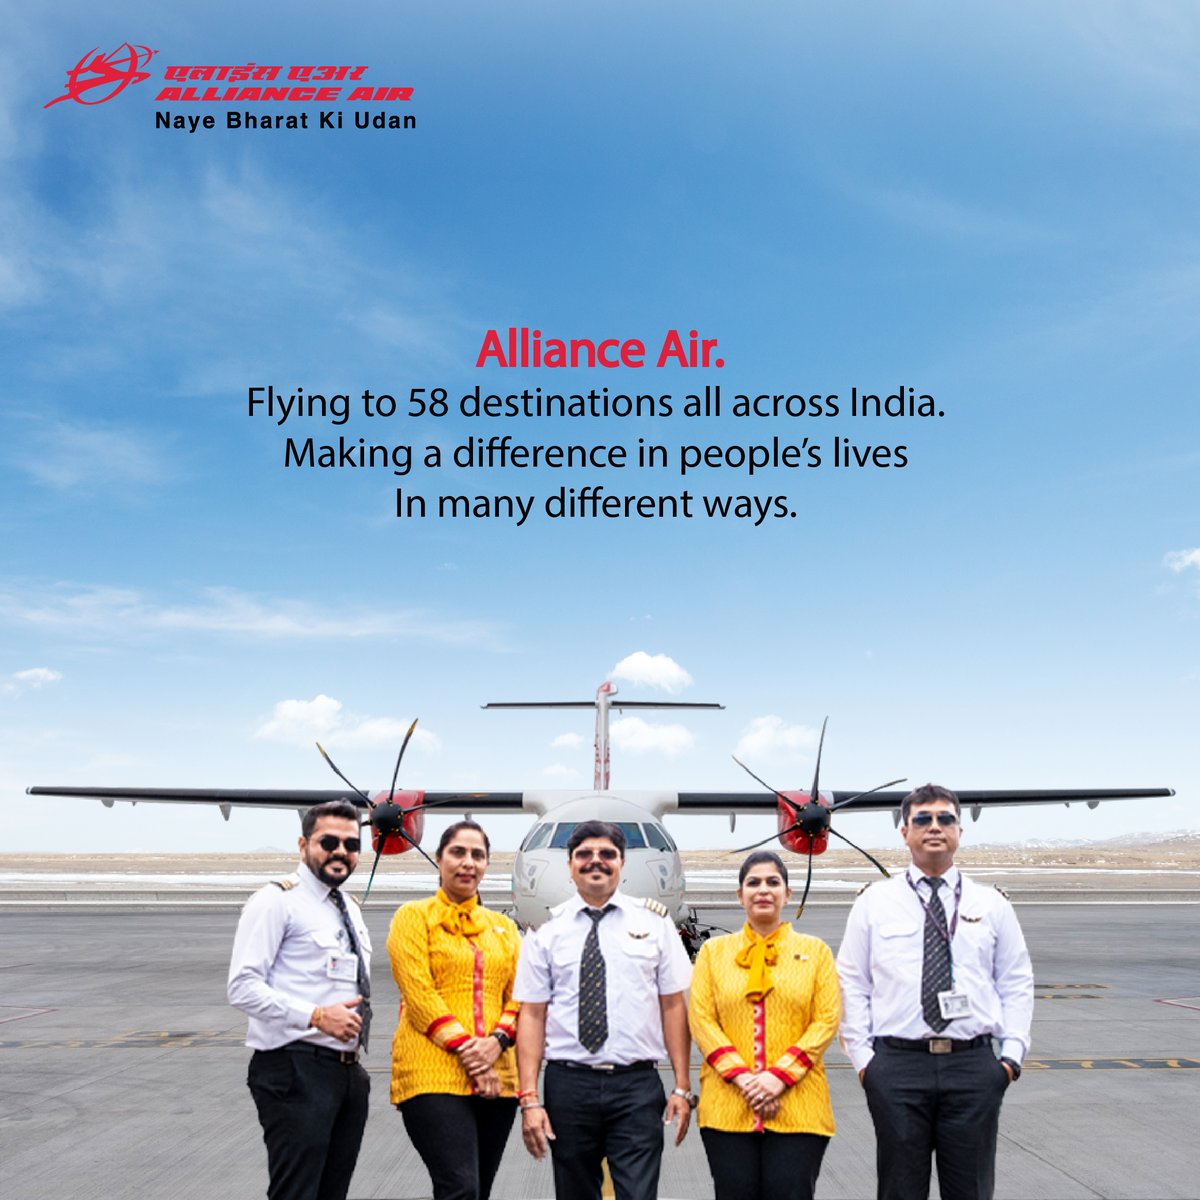 We thank the passengers of that plane who also contributed to saving those lives by waiting patiently. For bookings- allianceair.in/book or please contact +91-4442554255 or +91-4435113511 #Explore #Travel #YourWindowToIndia #aviation #didyouknow #organs #organdonation